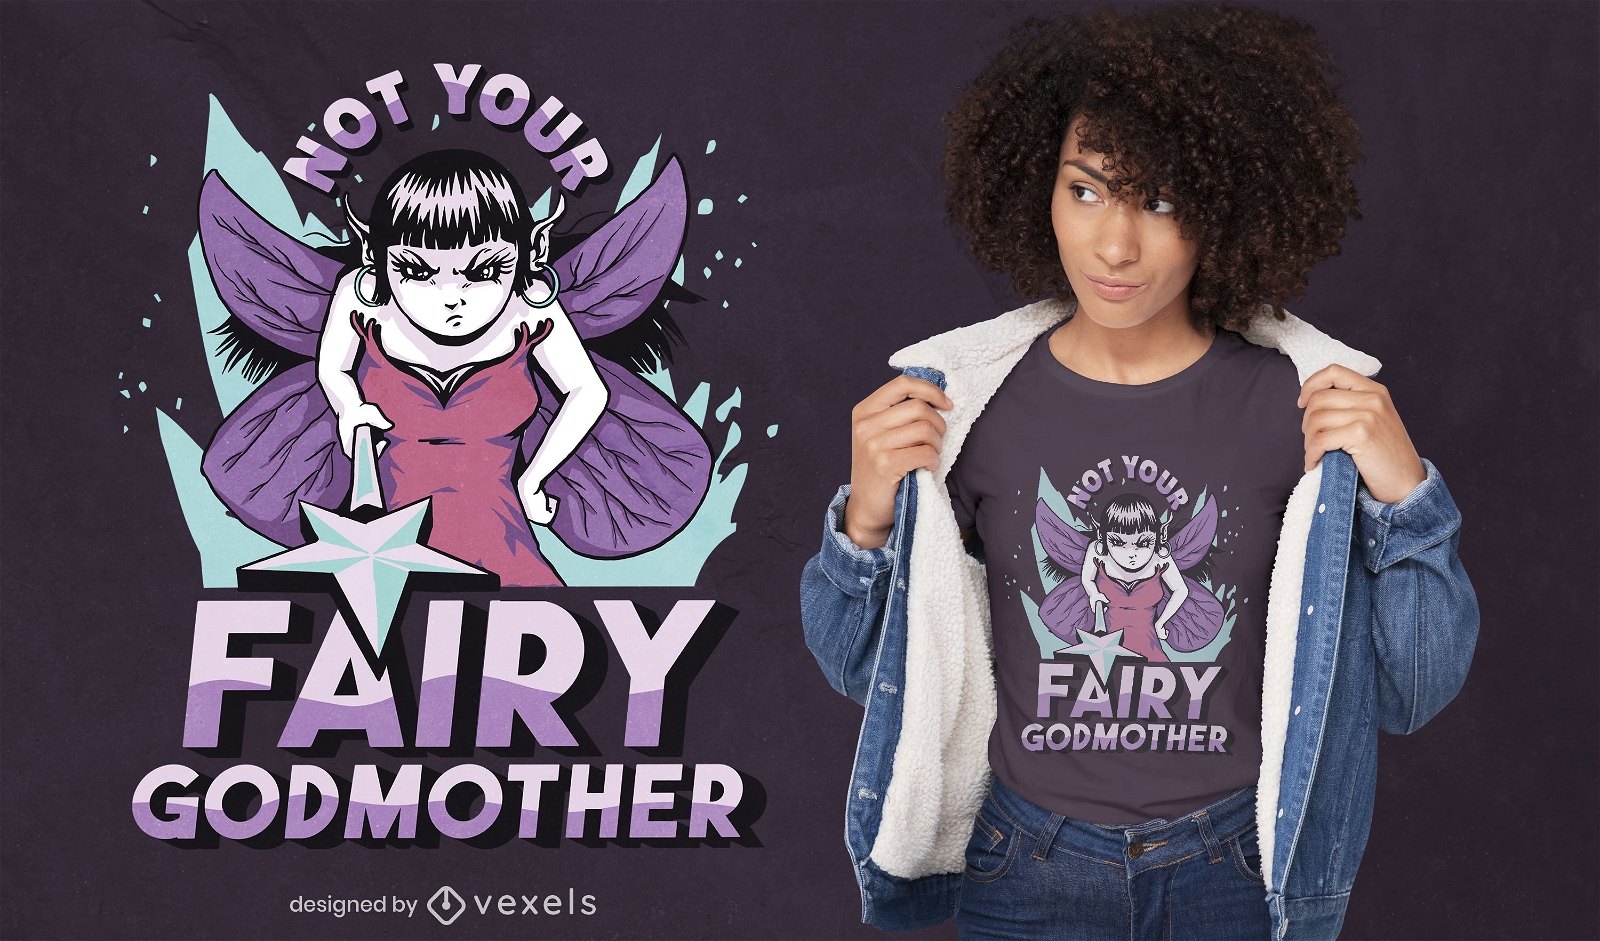 Angry fairy godmother fantasy t-shirt design